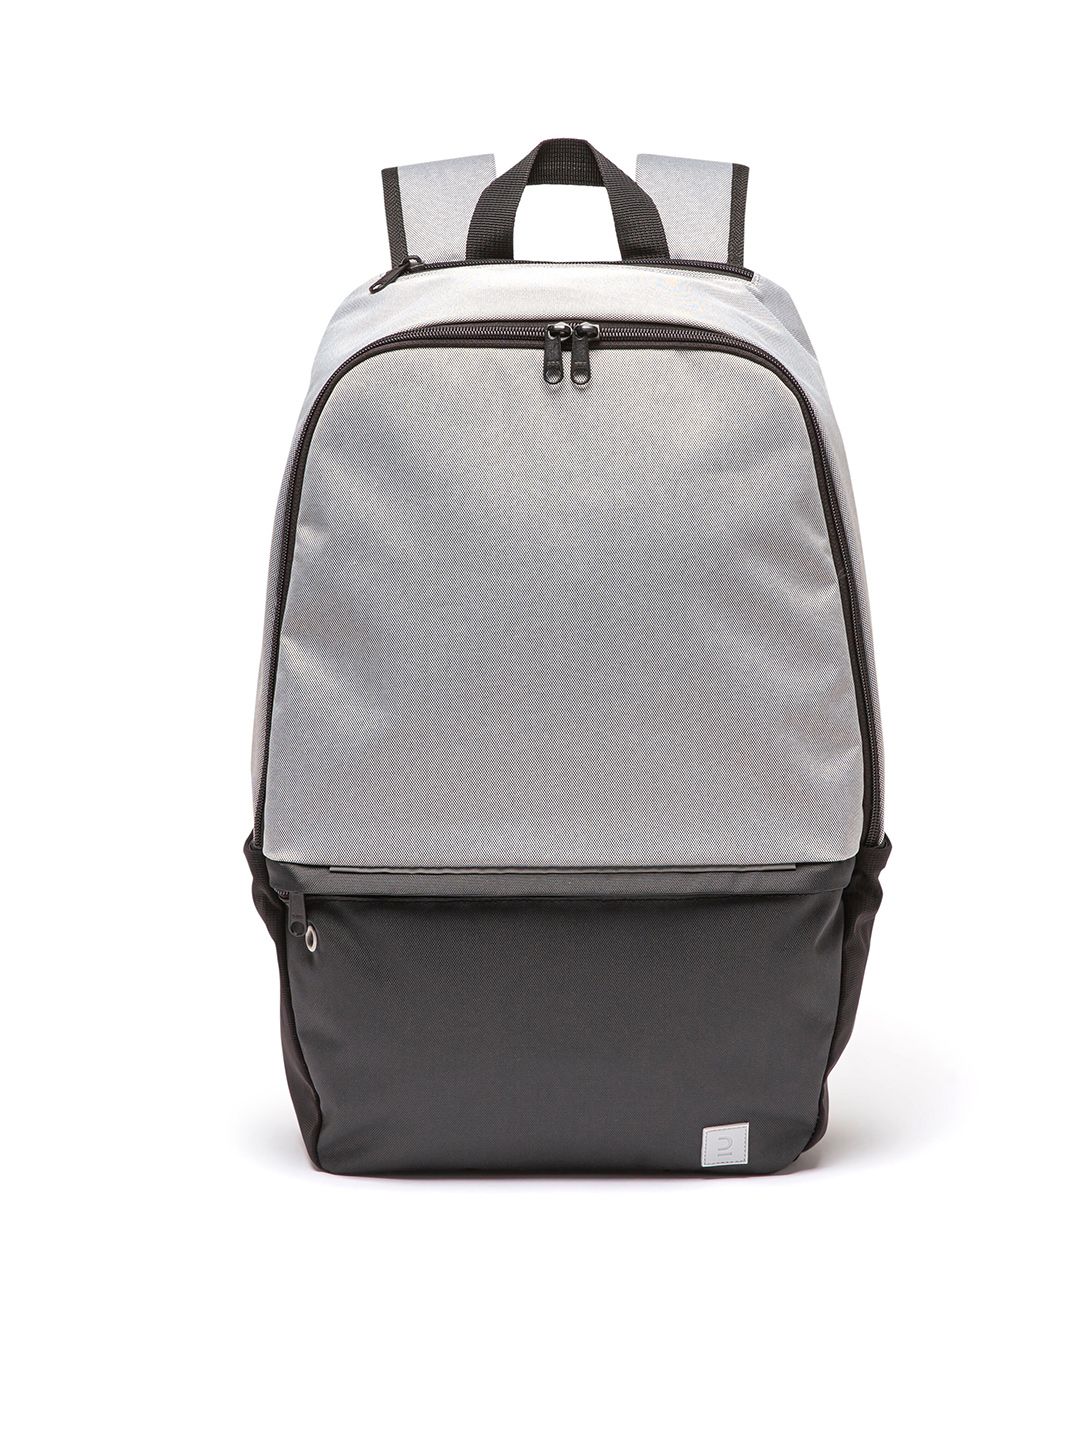 Kipsta By Decathlon Unisex Grey Backpack Price in India